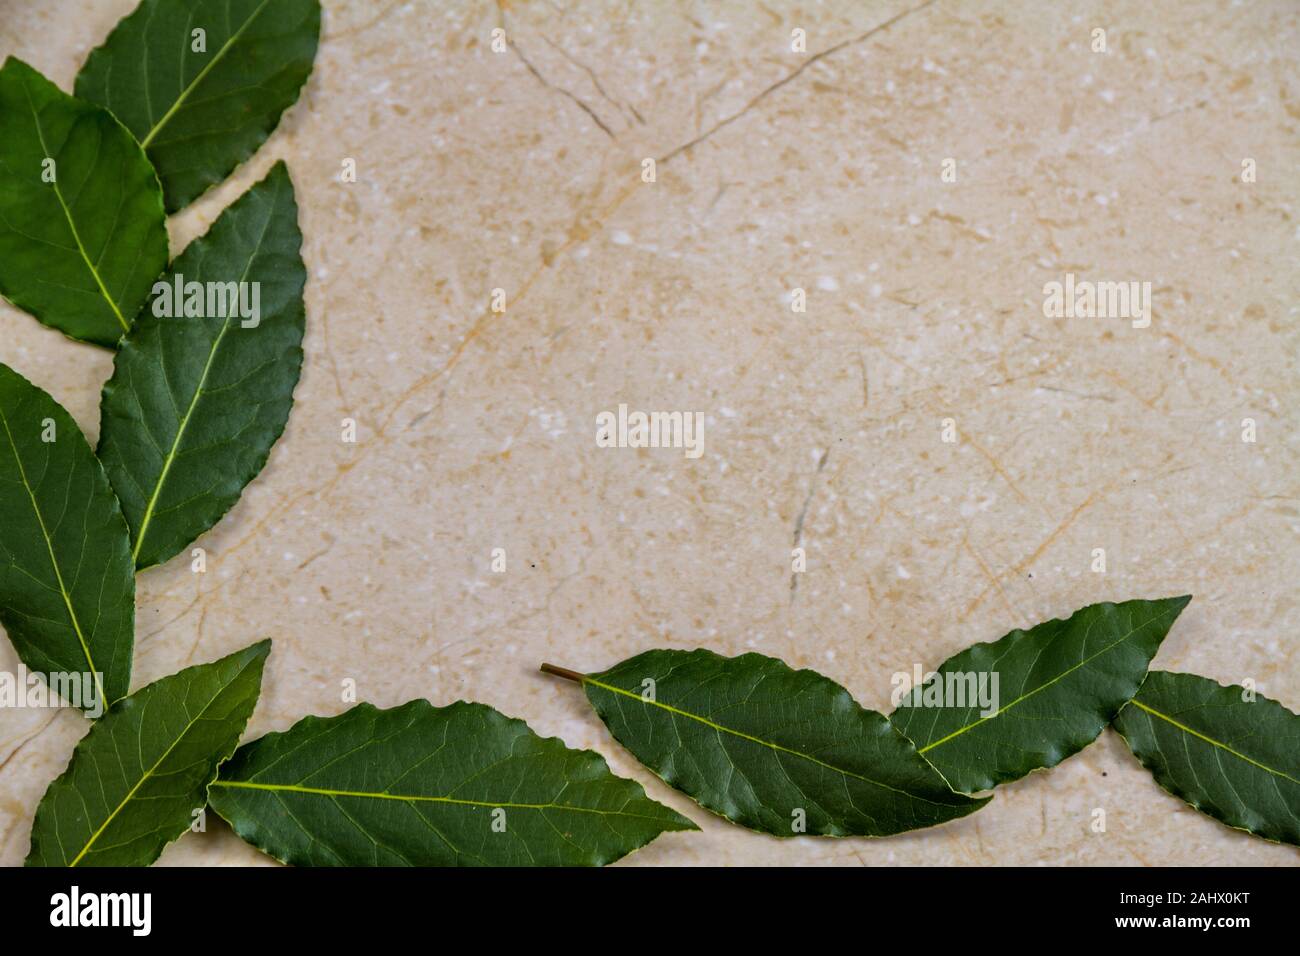 Graphic resource, green Bay leaves scattered on a marble background, in L shape, close up. Stock Photo